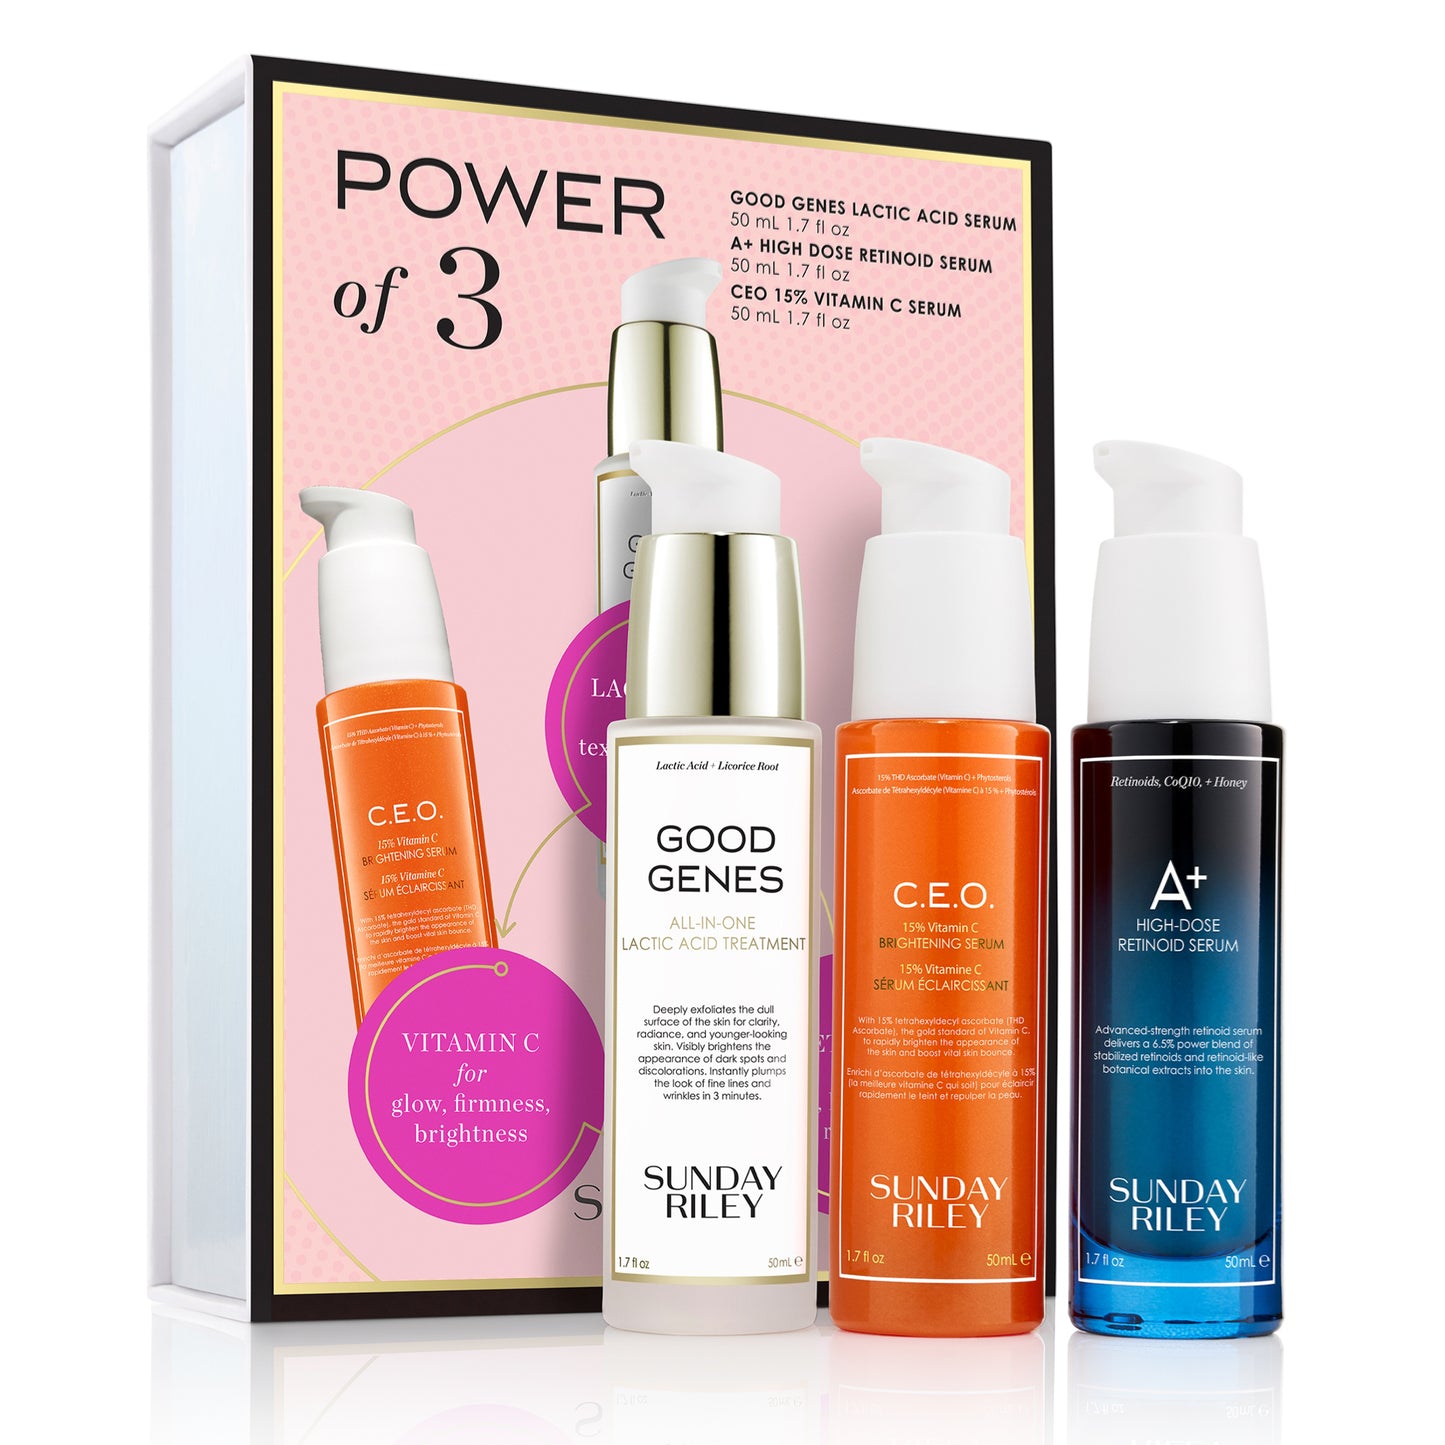 Power of 3 kit pack shot with Good Genes, C.E.O. Serum and A+ bottles